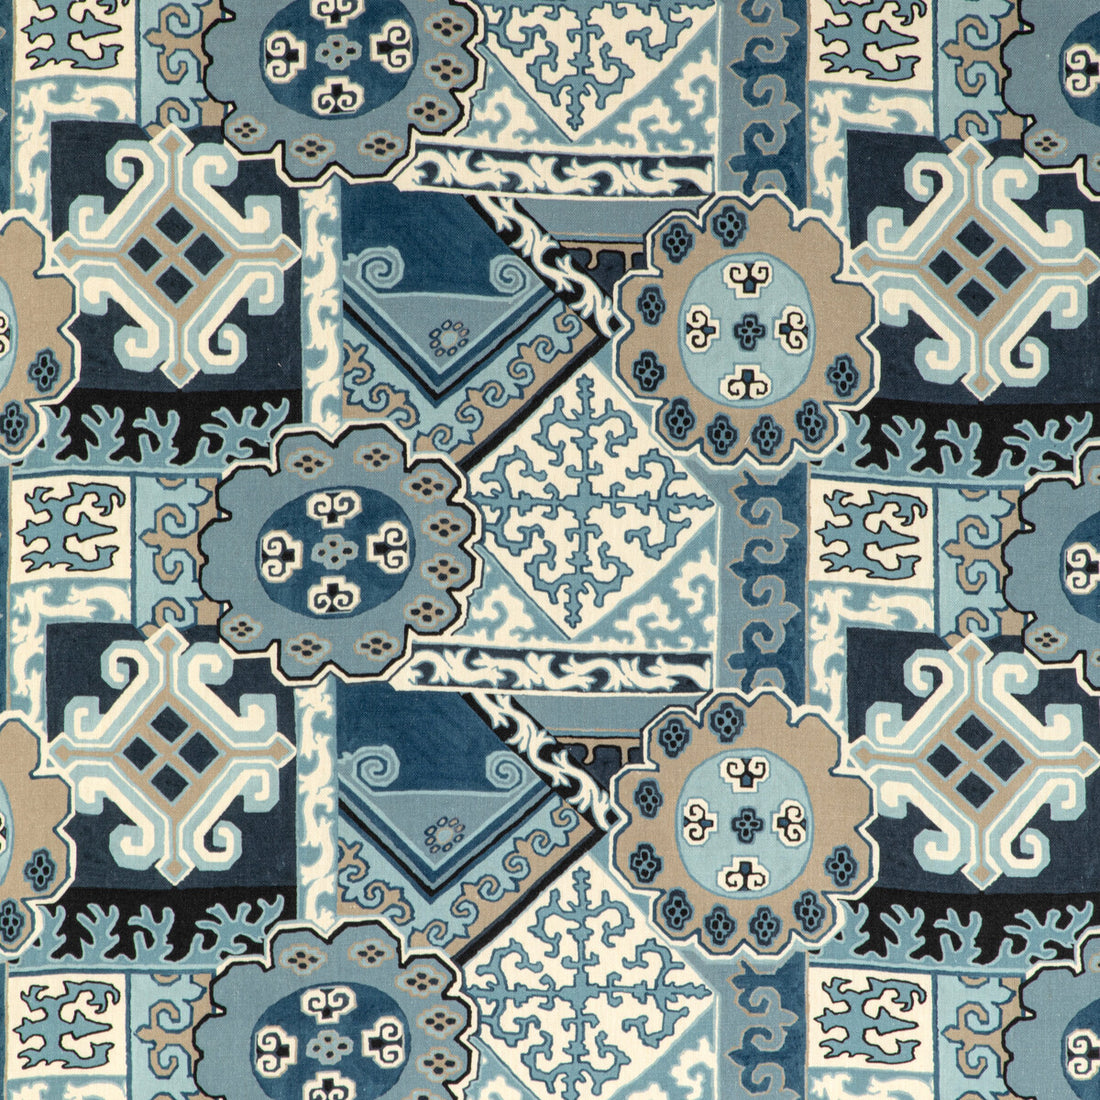 Batangas Print fabric in blue/slate color - pattern 2020193.505.0 - by Lee Jofa in the Mindoro collection